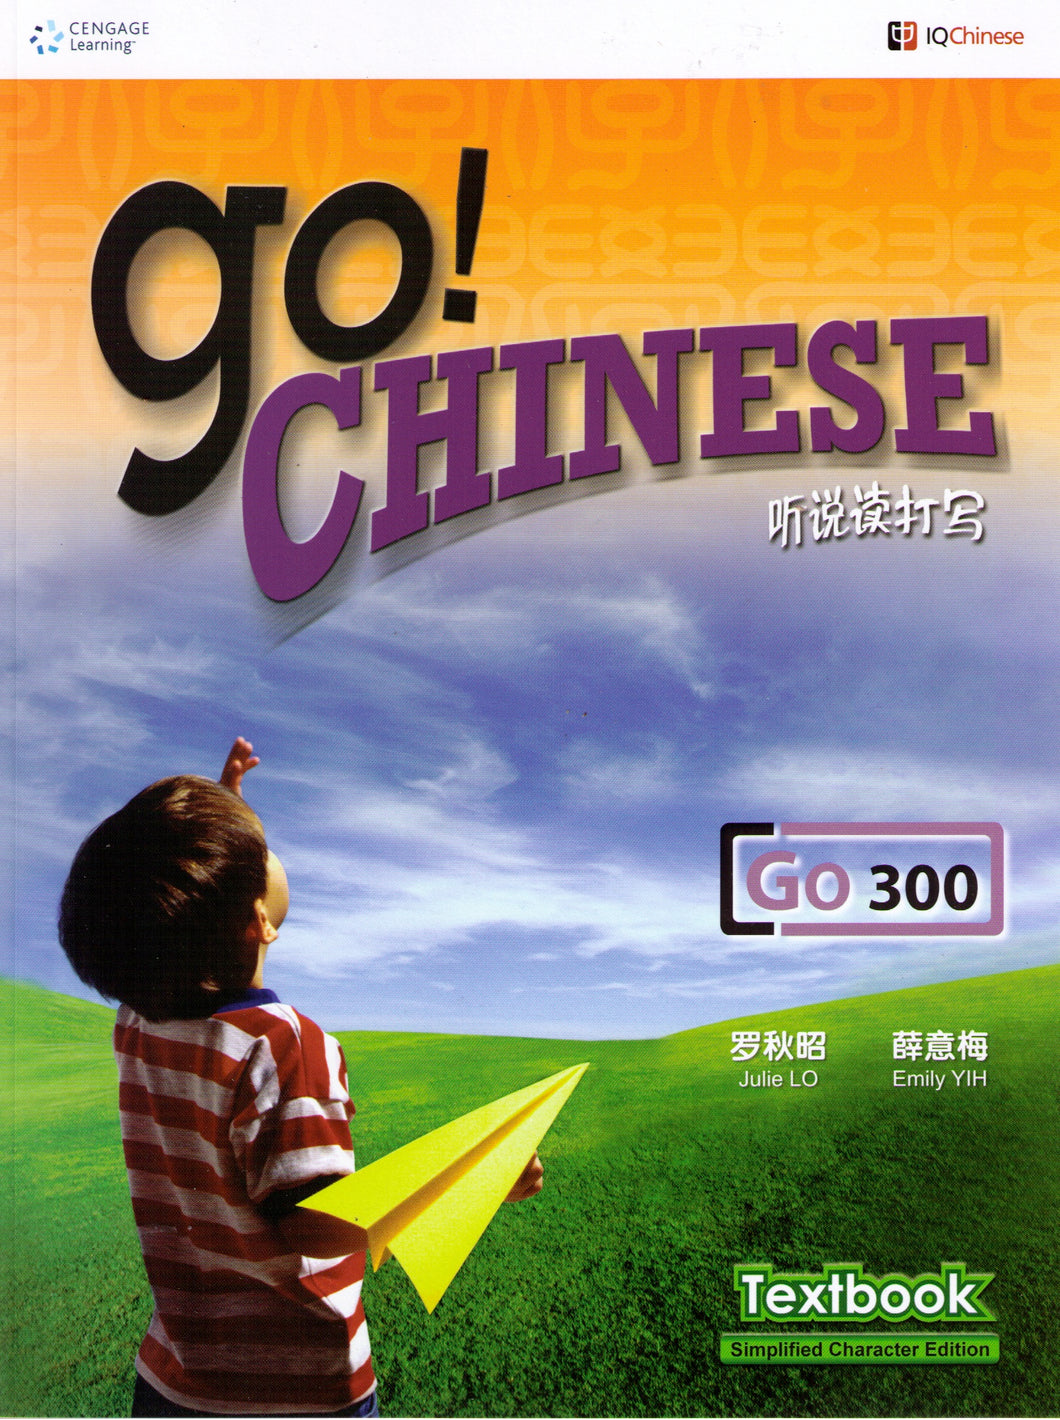 Go Chinese and IQ Chinese 300-Textbook-Simplified